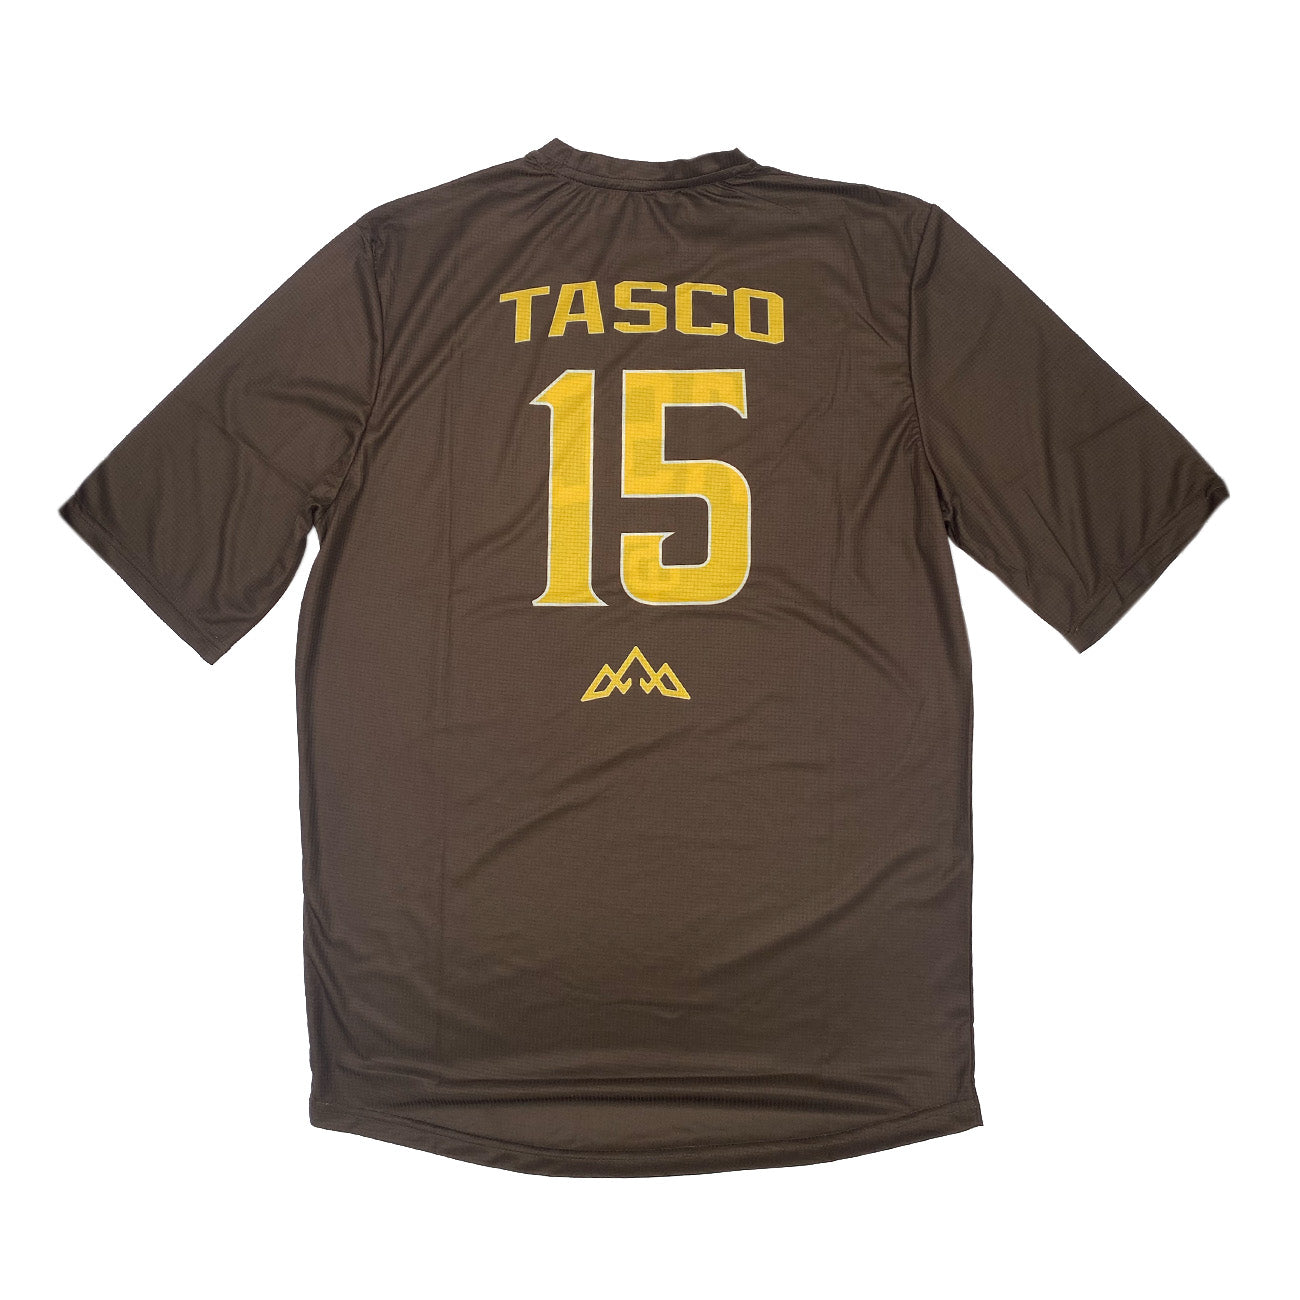 TASCO SenDiego Jersey - San Diego Padres biking jersey, brown and yellow vintage jersey colors #15 on back